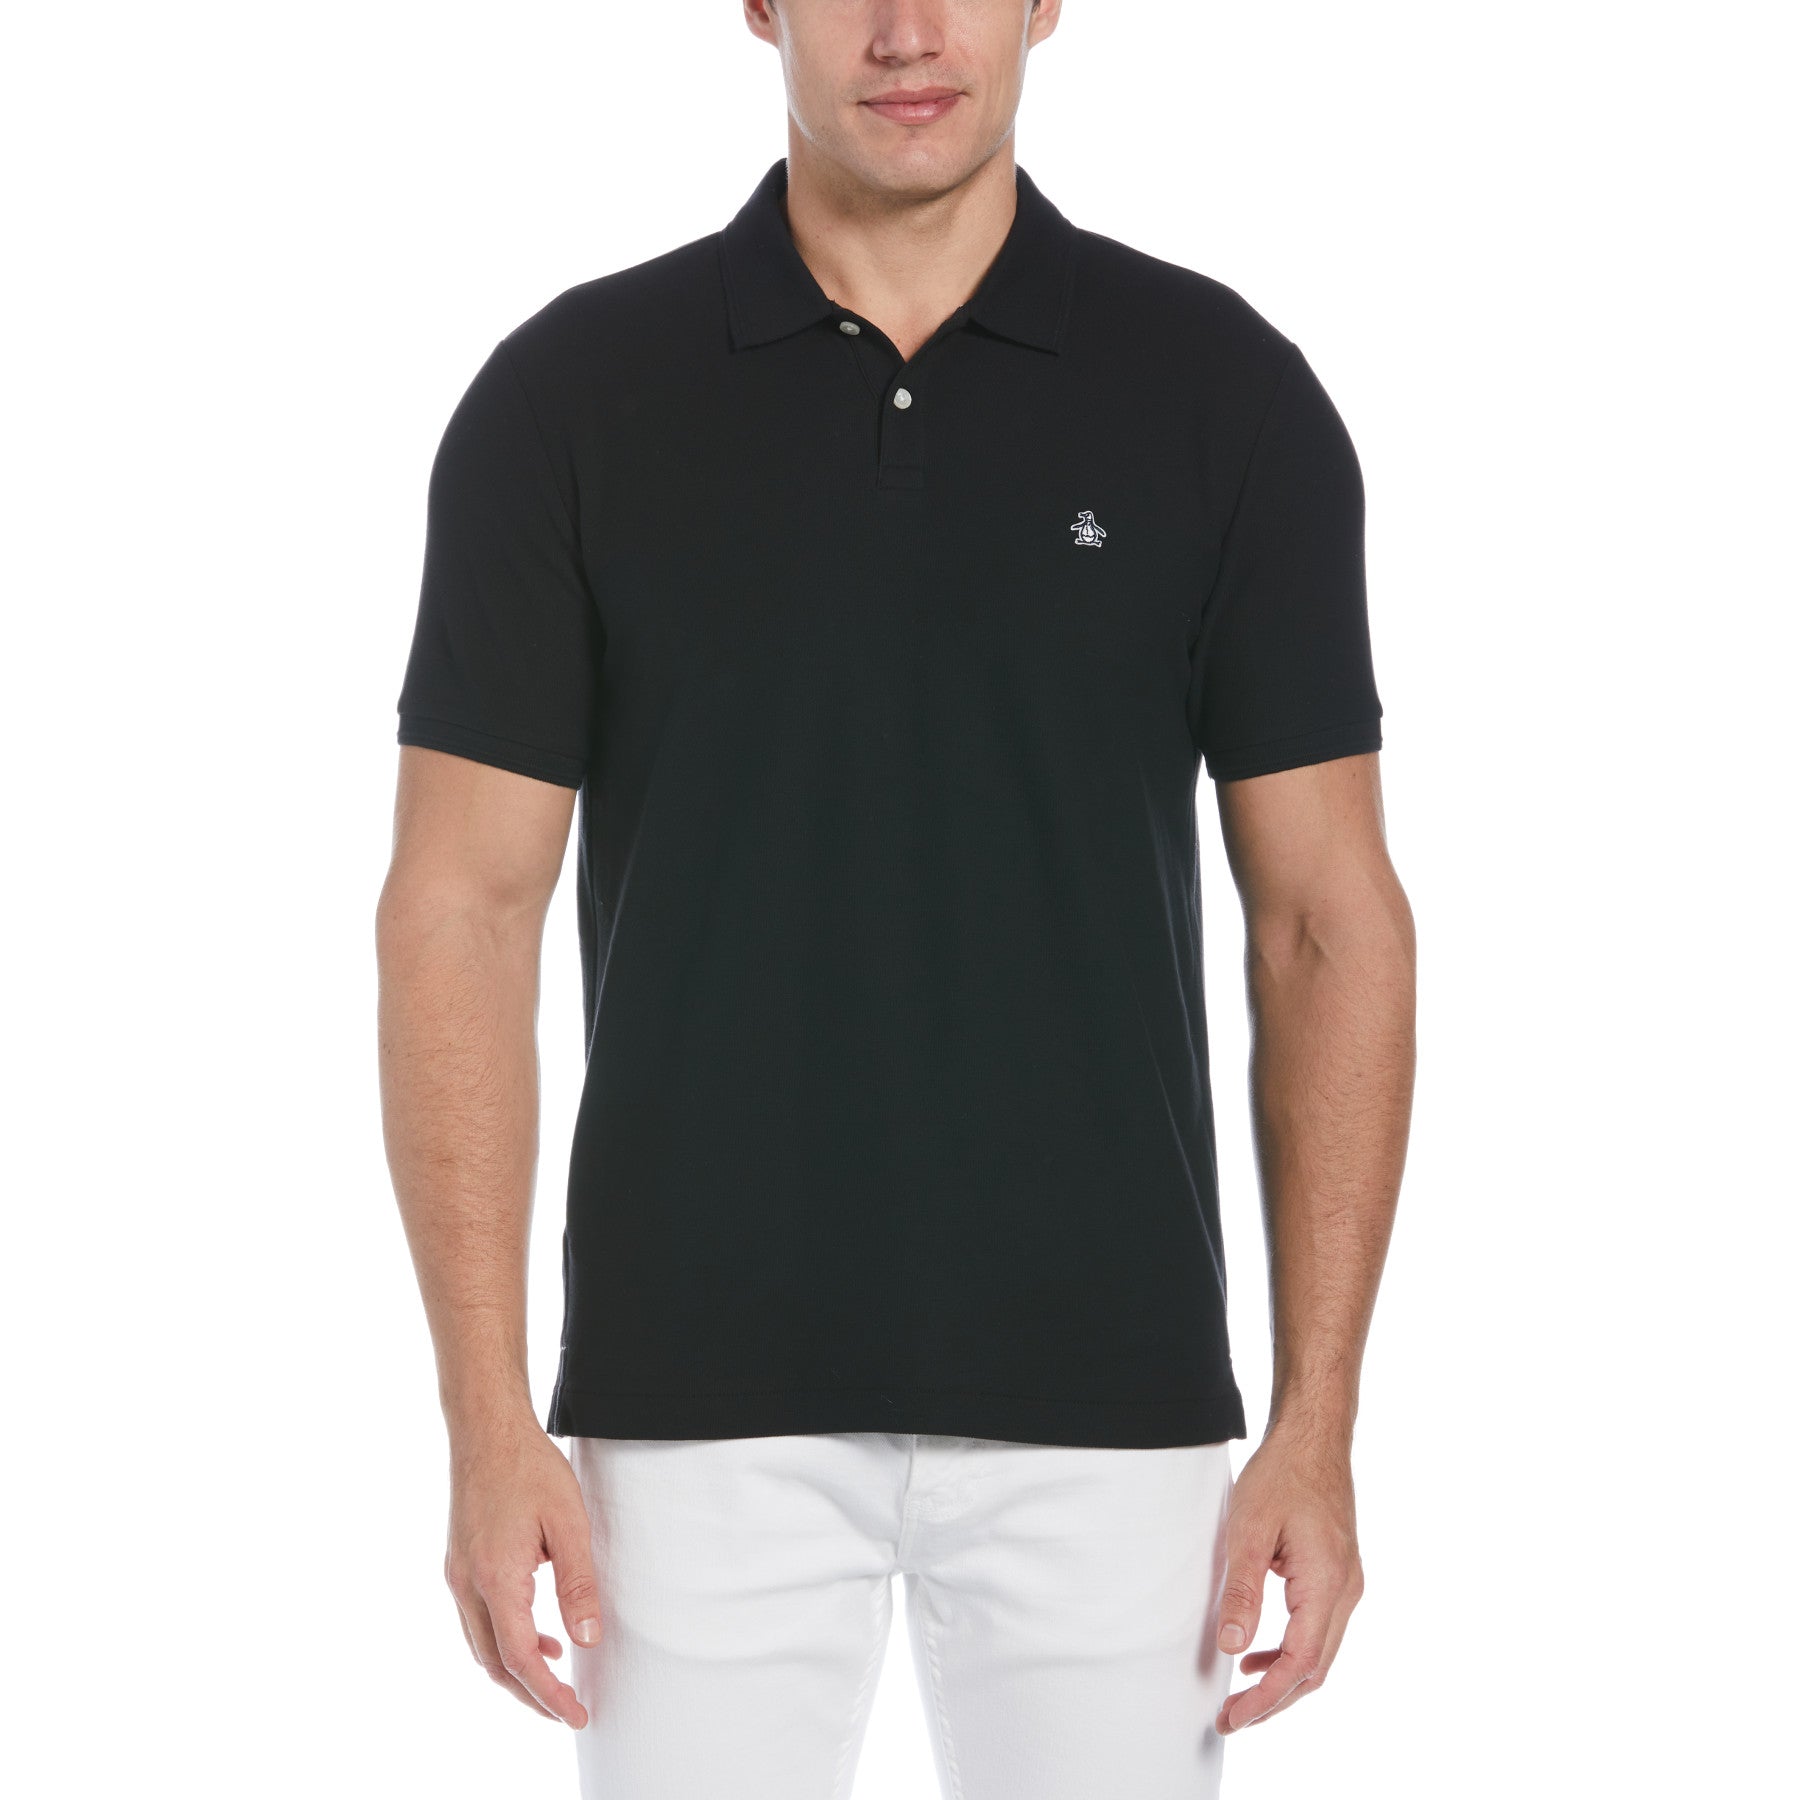 View Daddy Organic Cotton Polo Shirt In True Black information